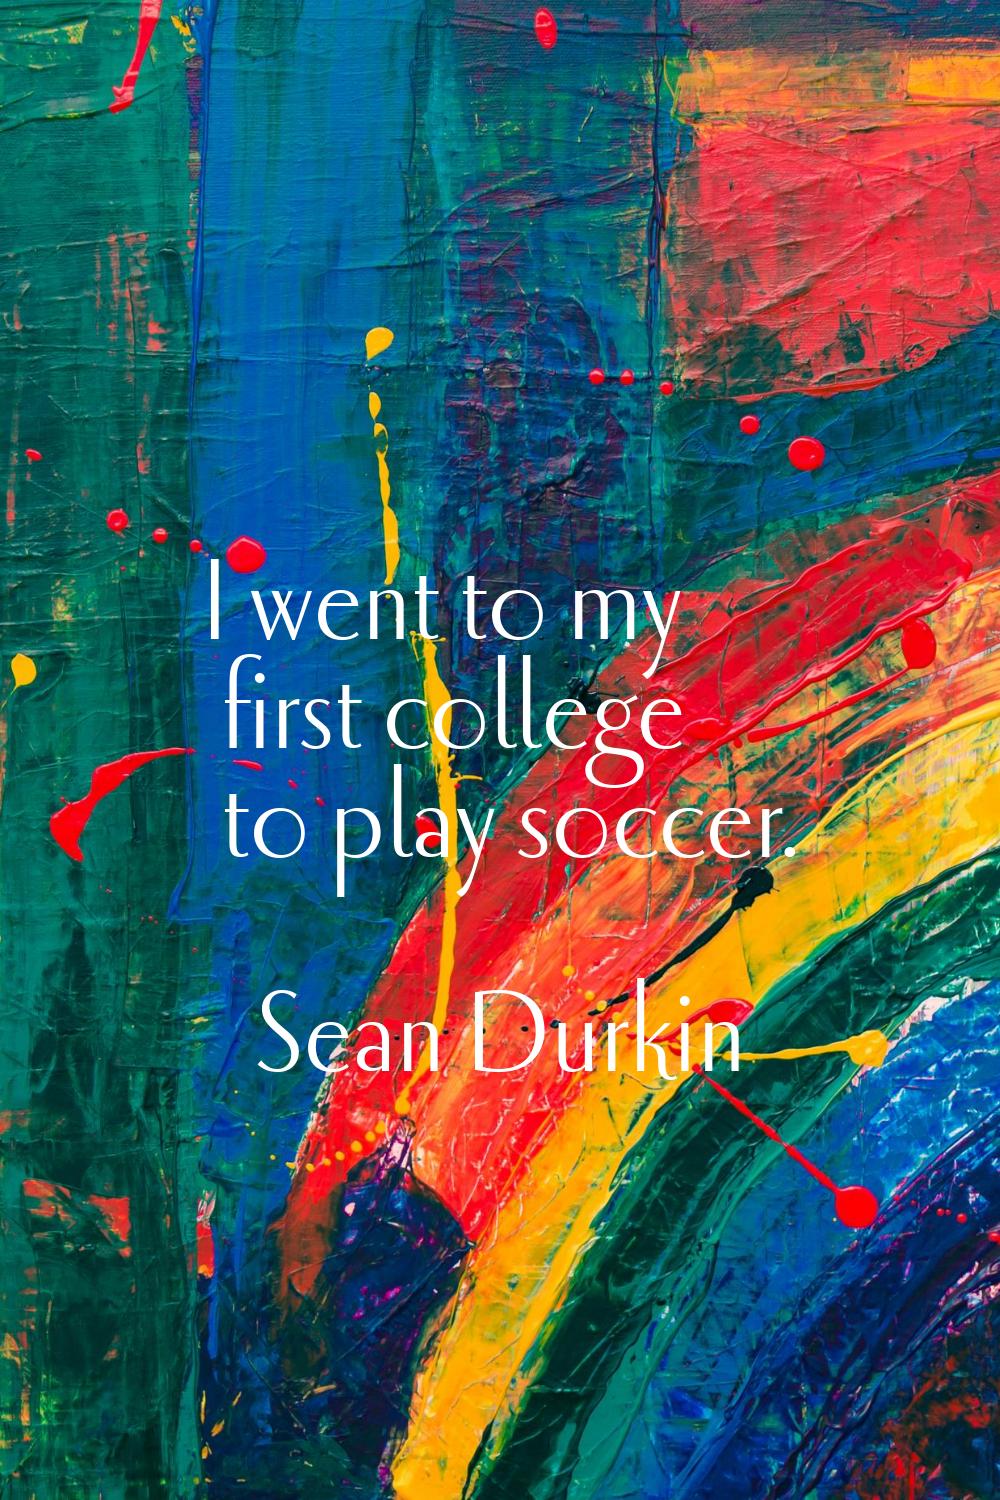 I went to my first college to play soccer.